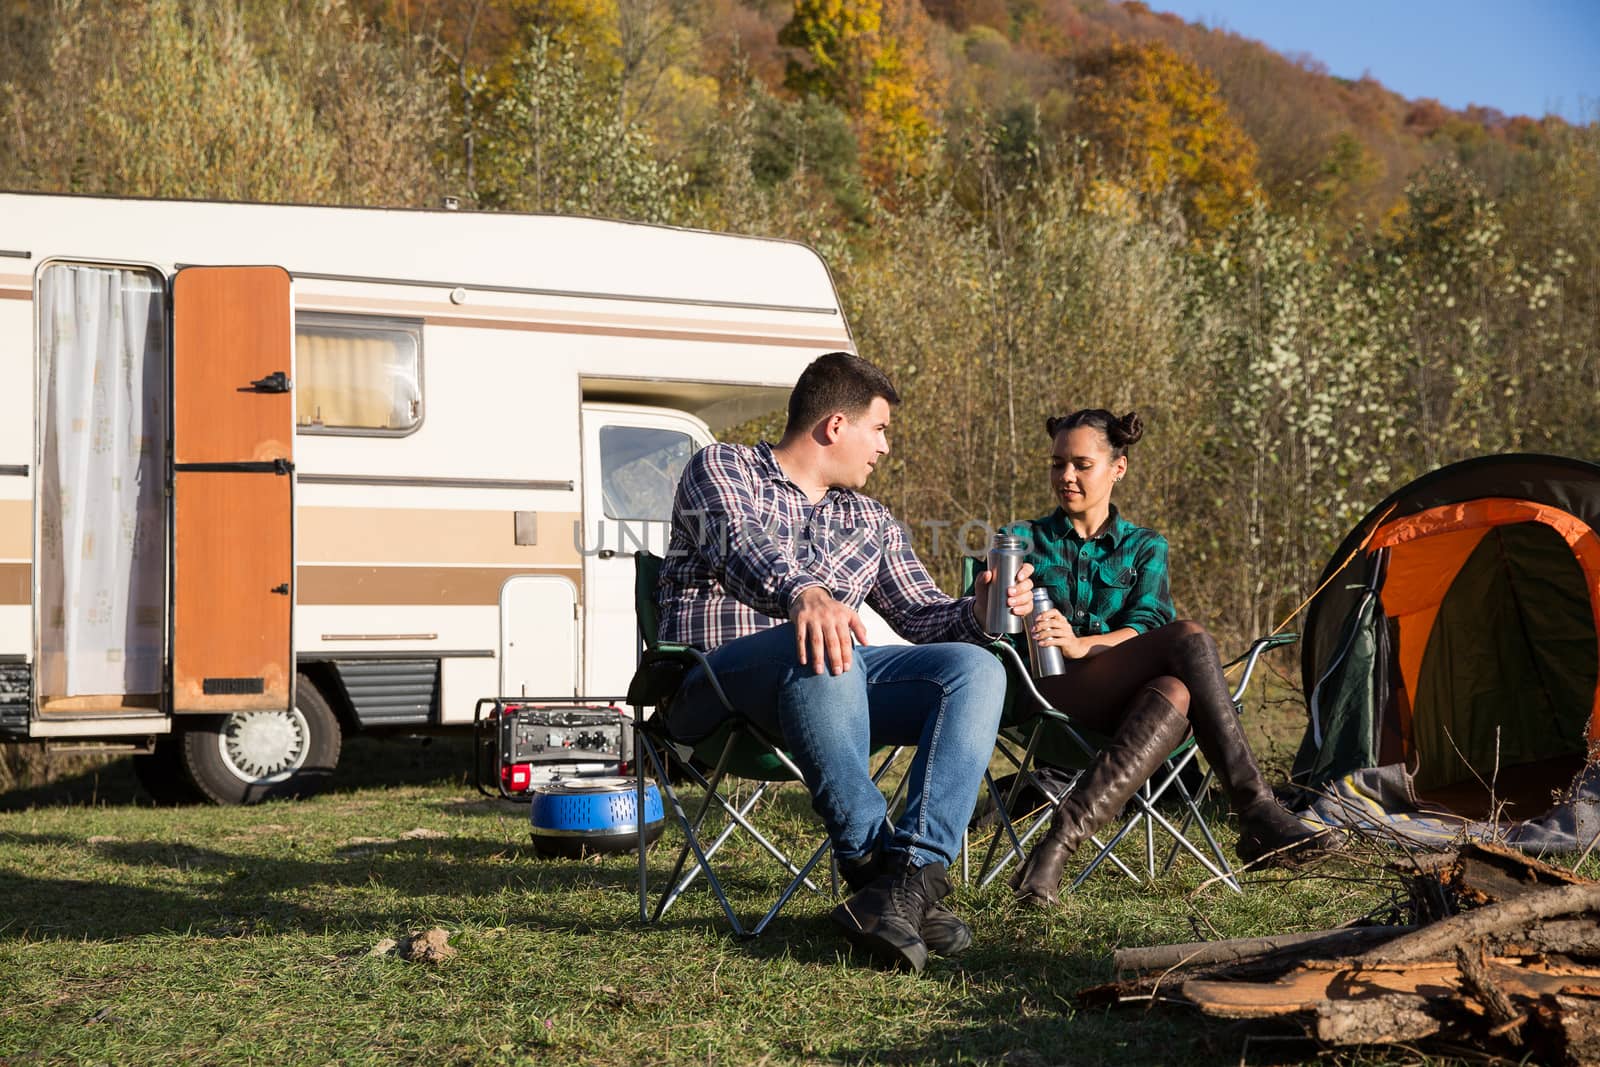 Couple enjoying their holiday in a mountain camps site. Couple camping with retro camper van.